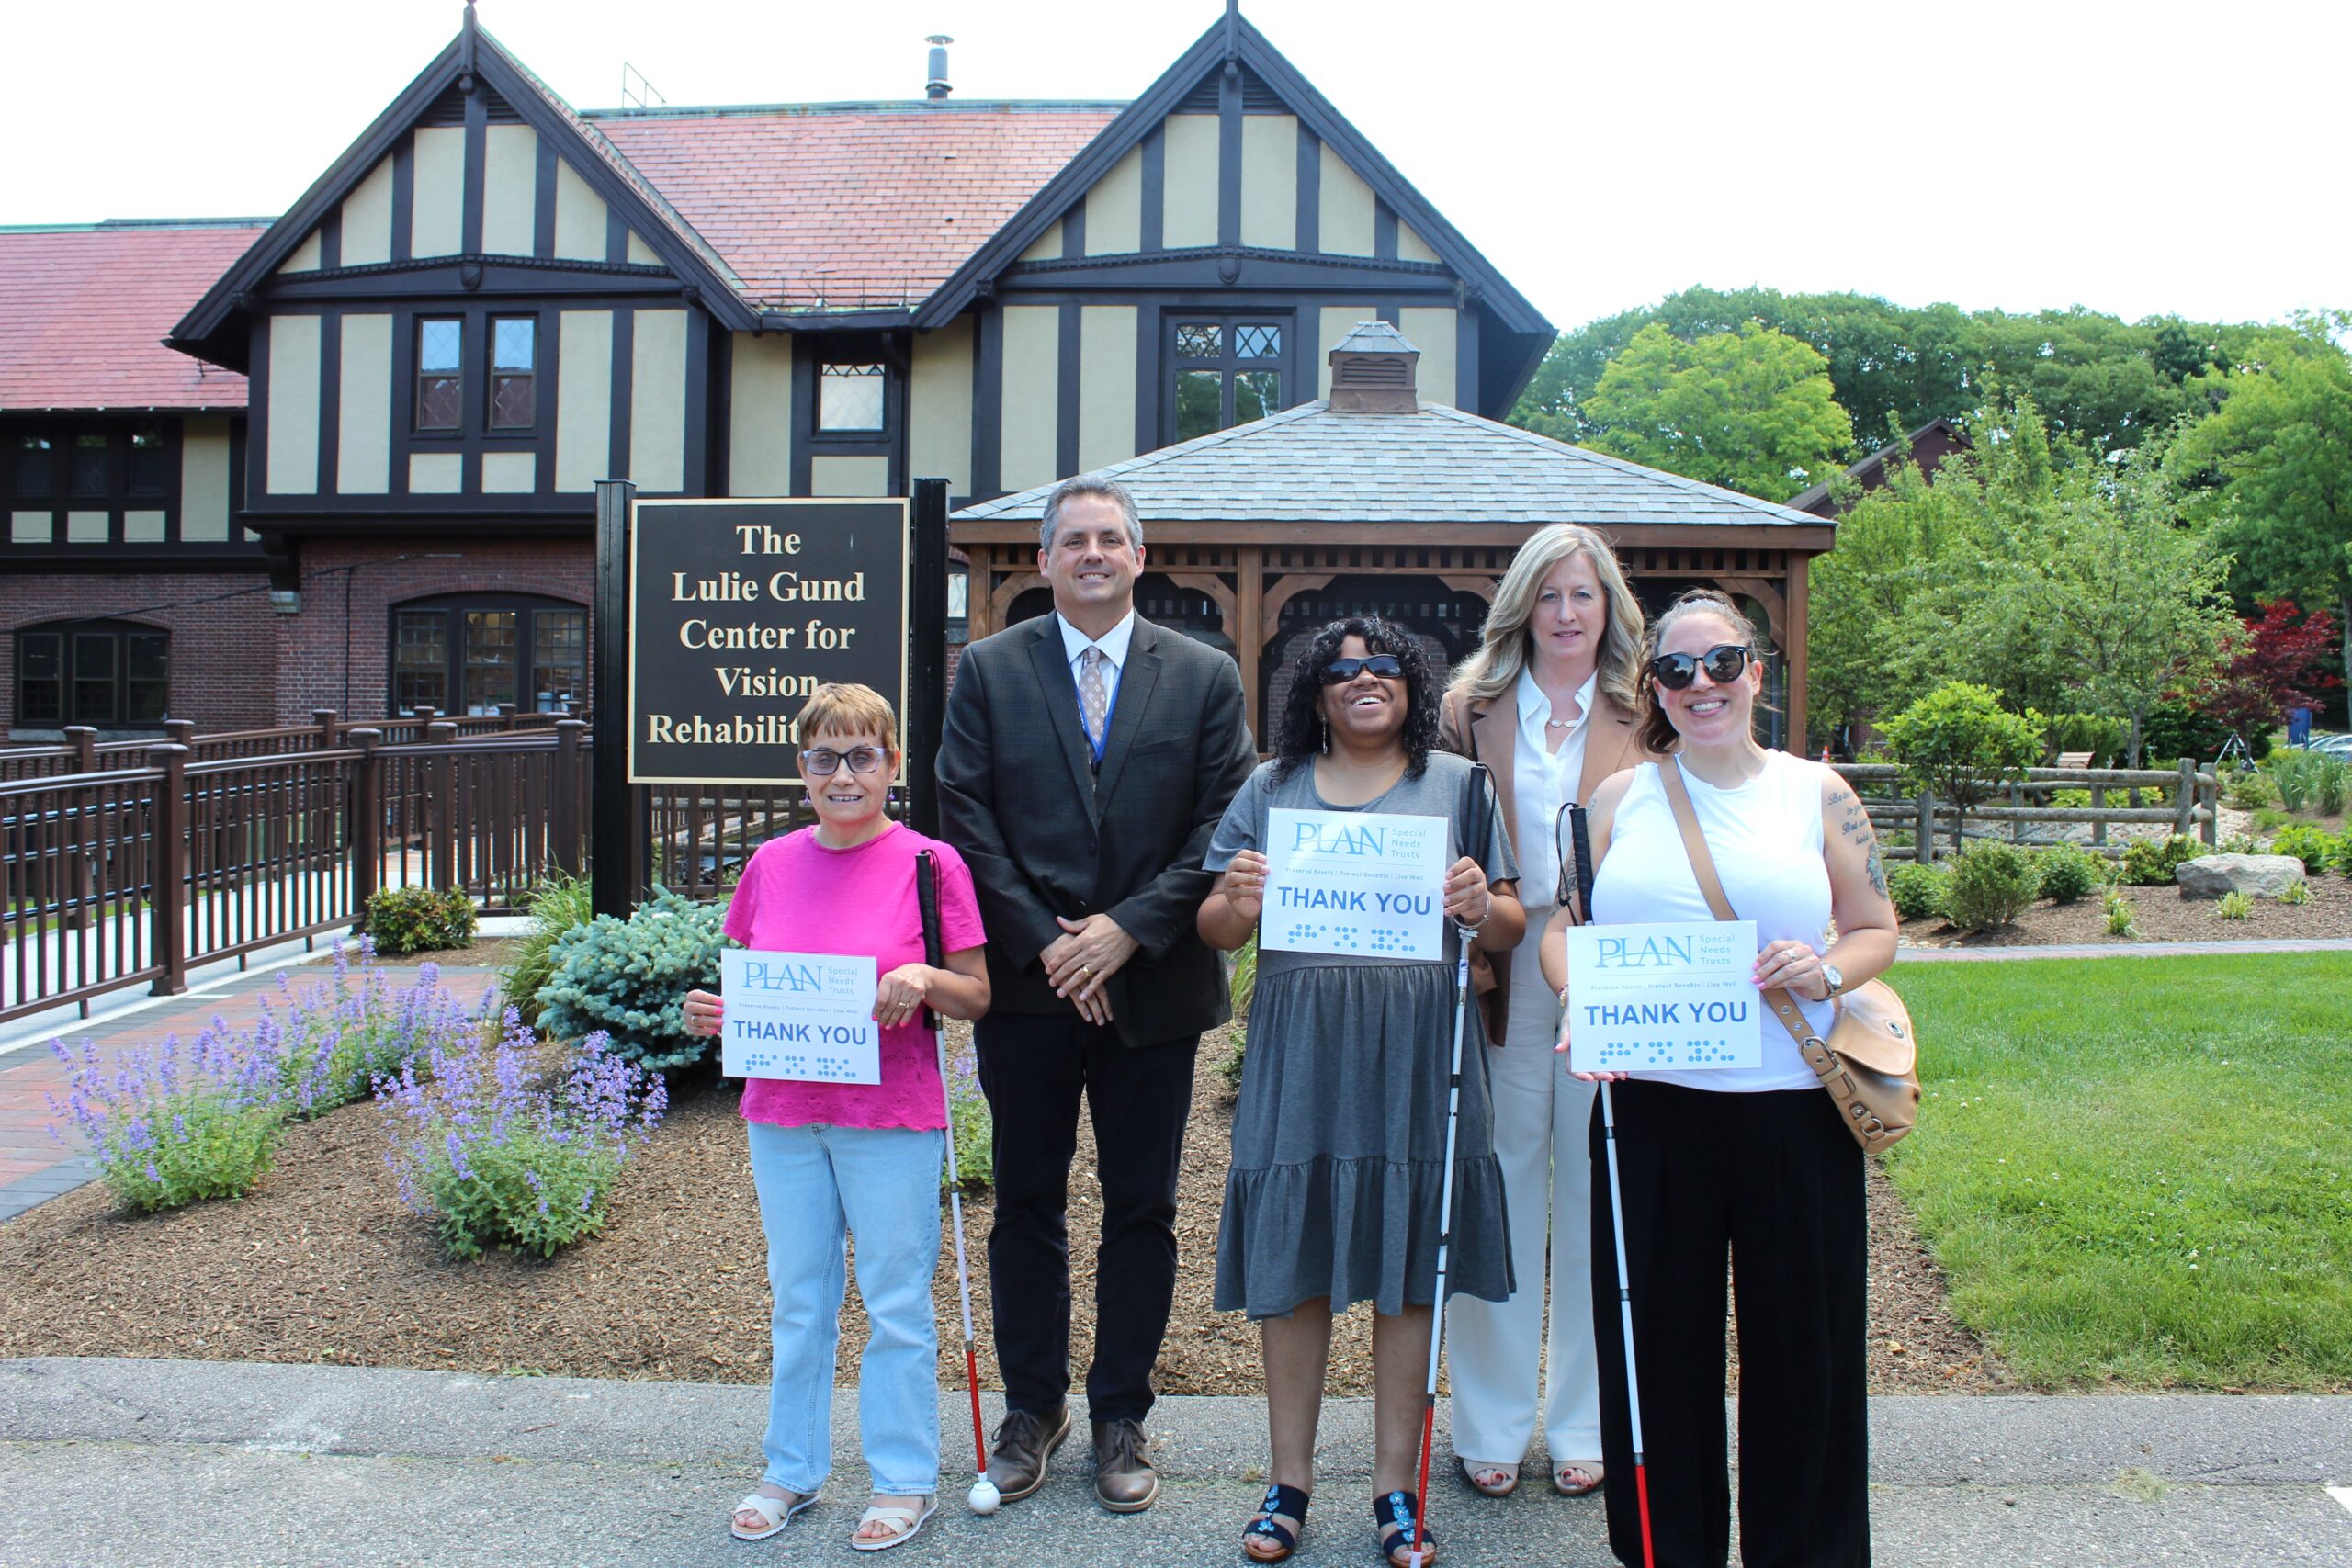 Carroll Center President and CEO, Greg Donnelly and a representative from PLAN stand in front of The Lulie Gund Center for Vision Rehabilitation next to three women with white canes who are holding “Thank You PLAN” signs.